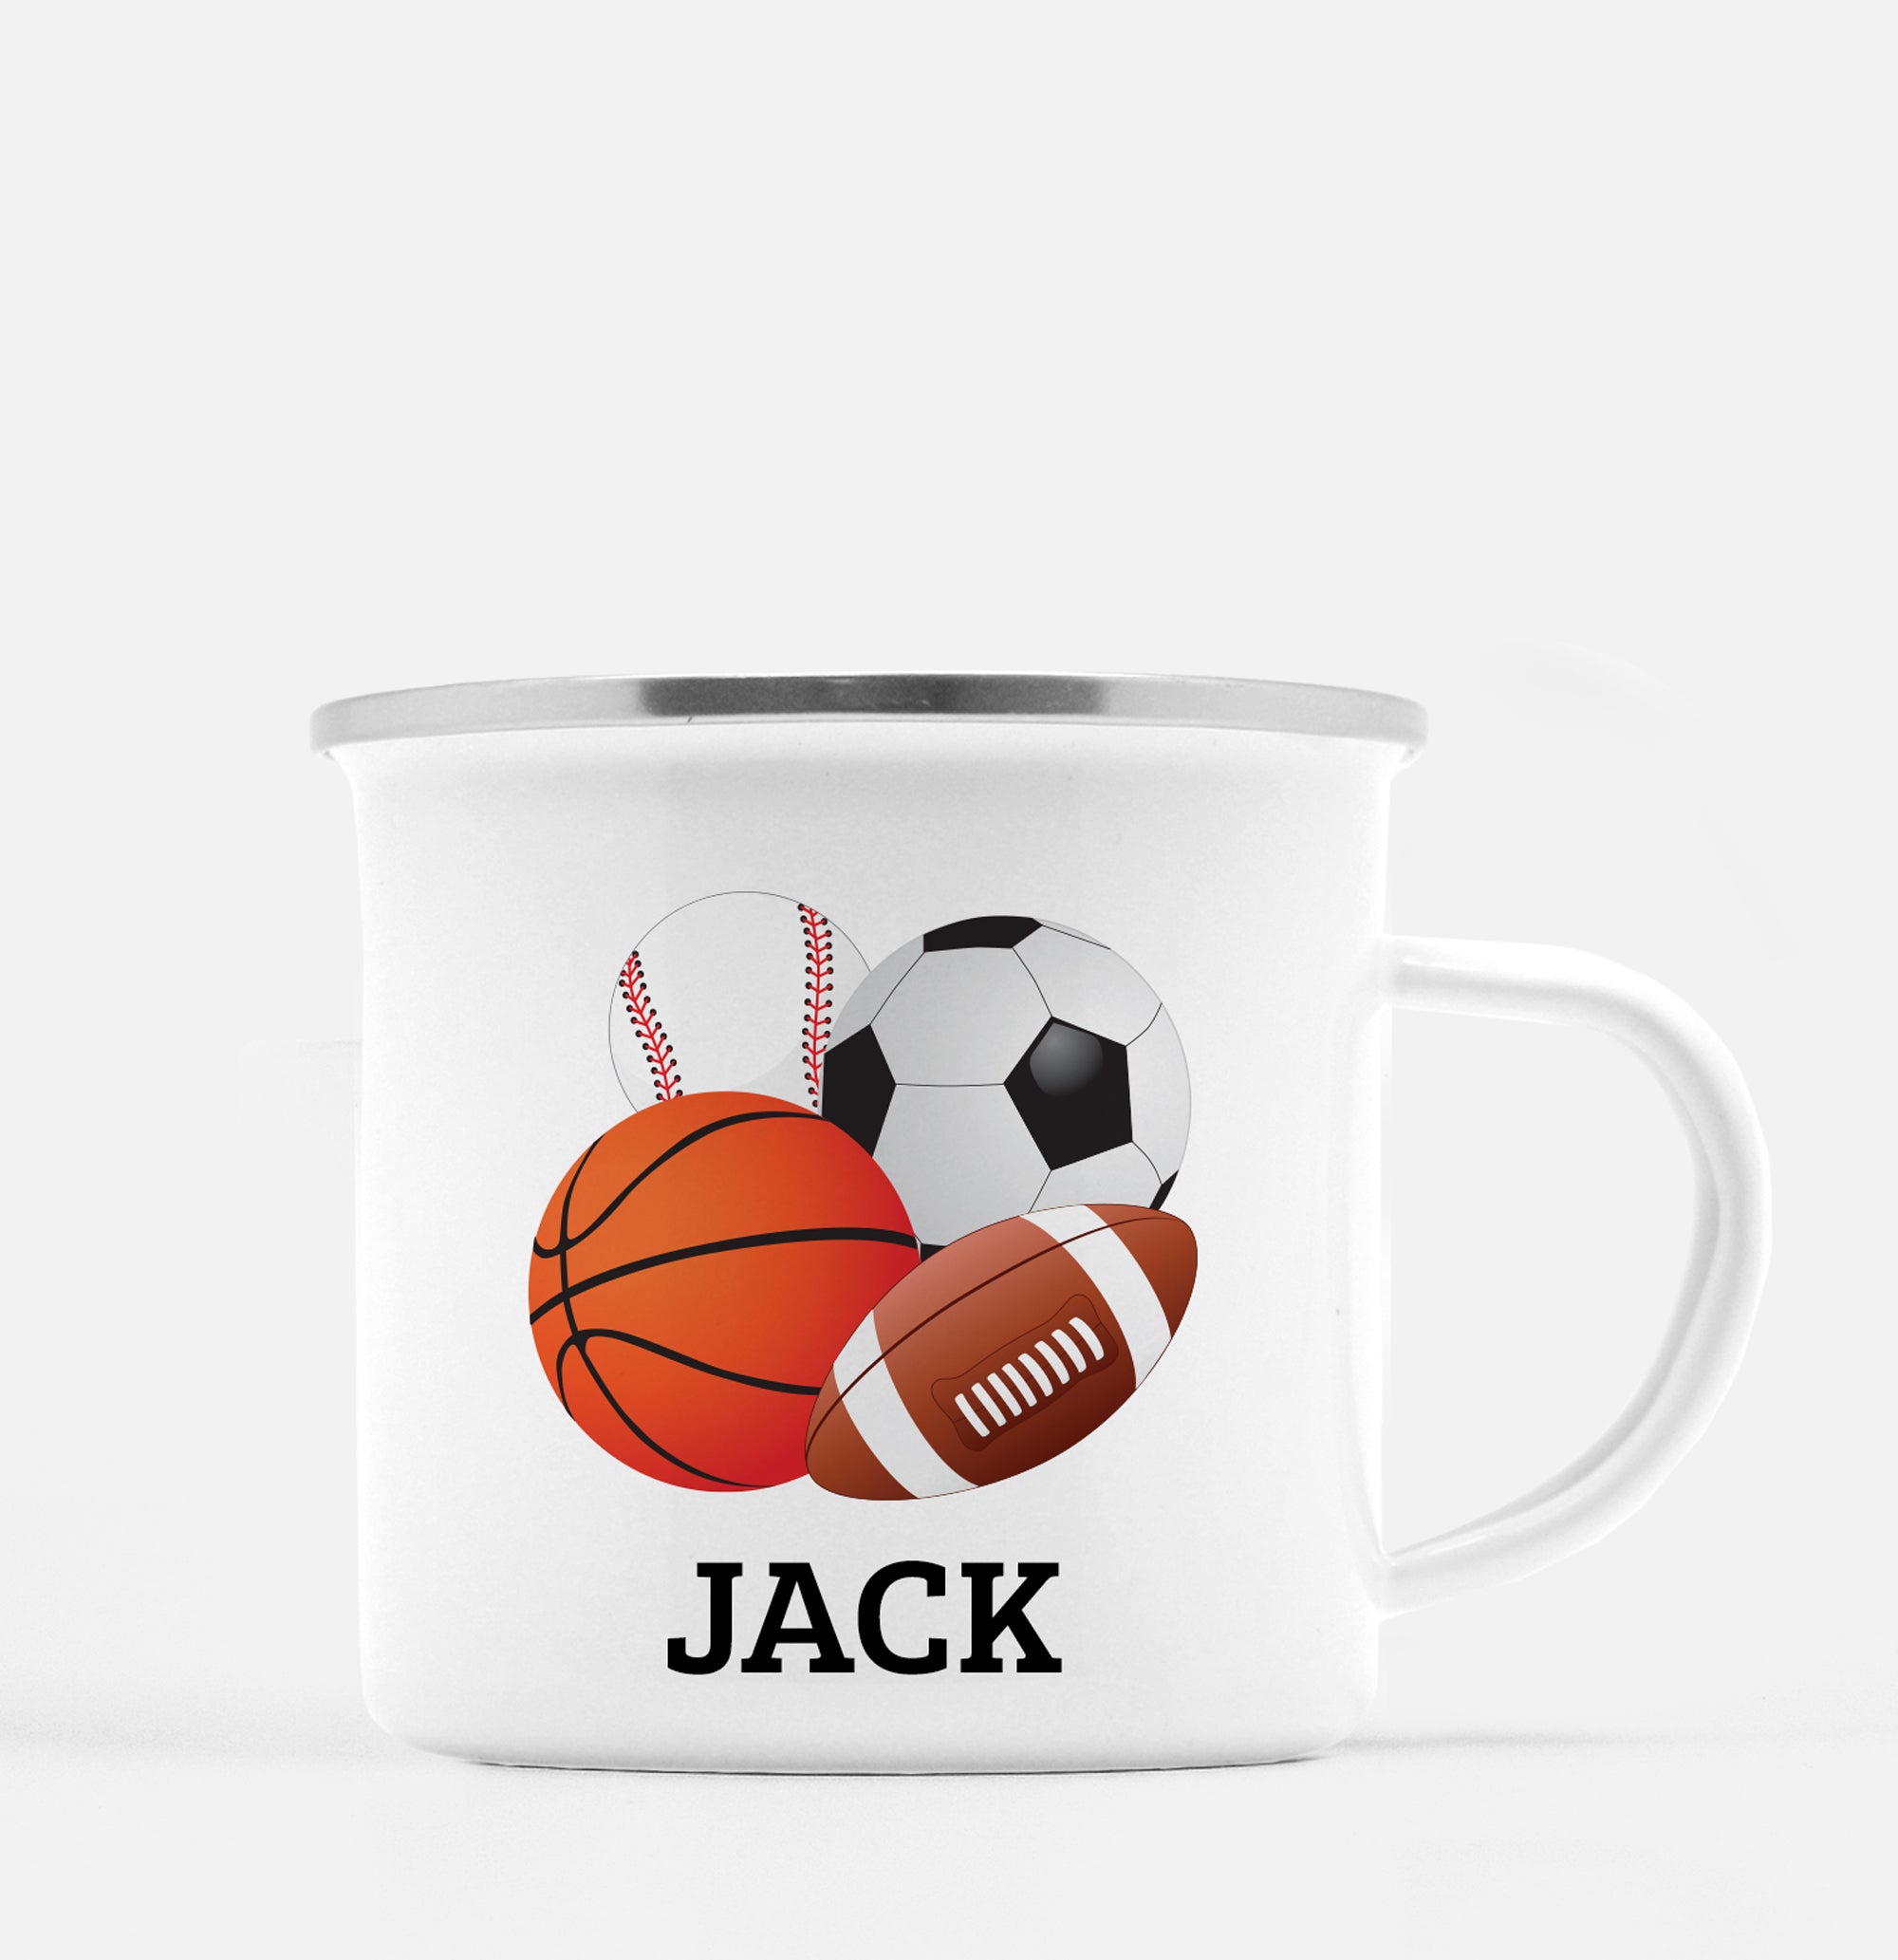 Sports Camp mug featuring a basketball, football, baseball, and a soccer ball. Personalized with your chlid's name